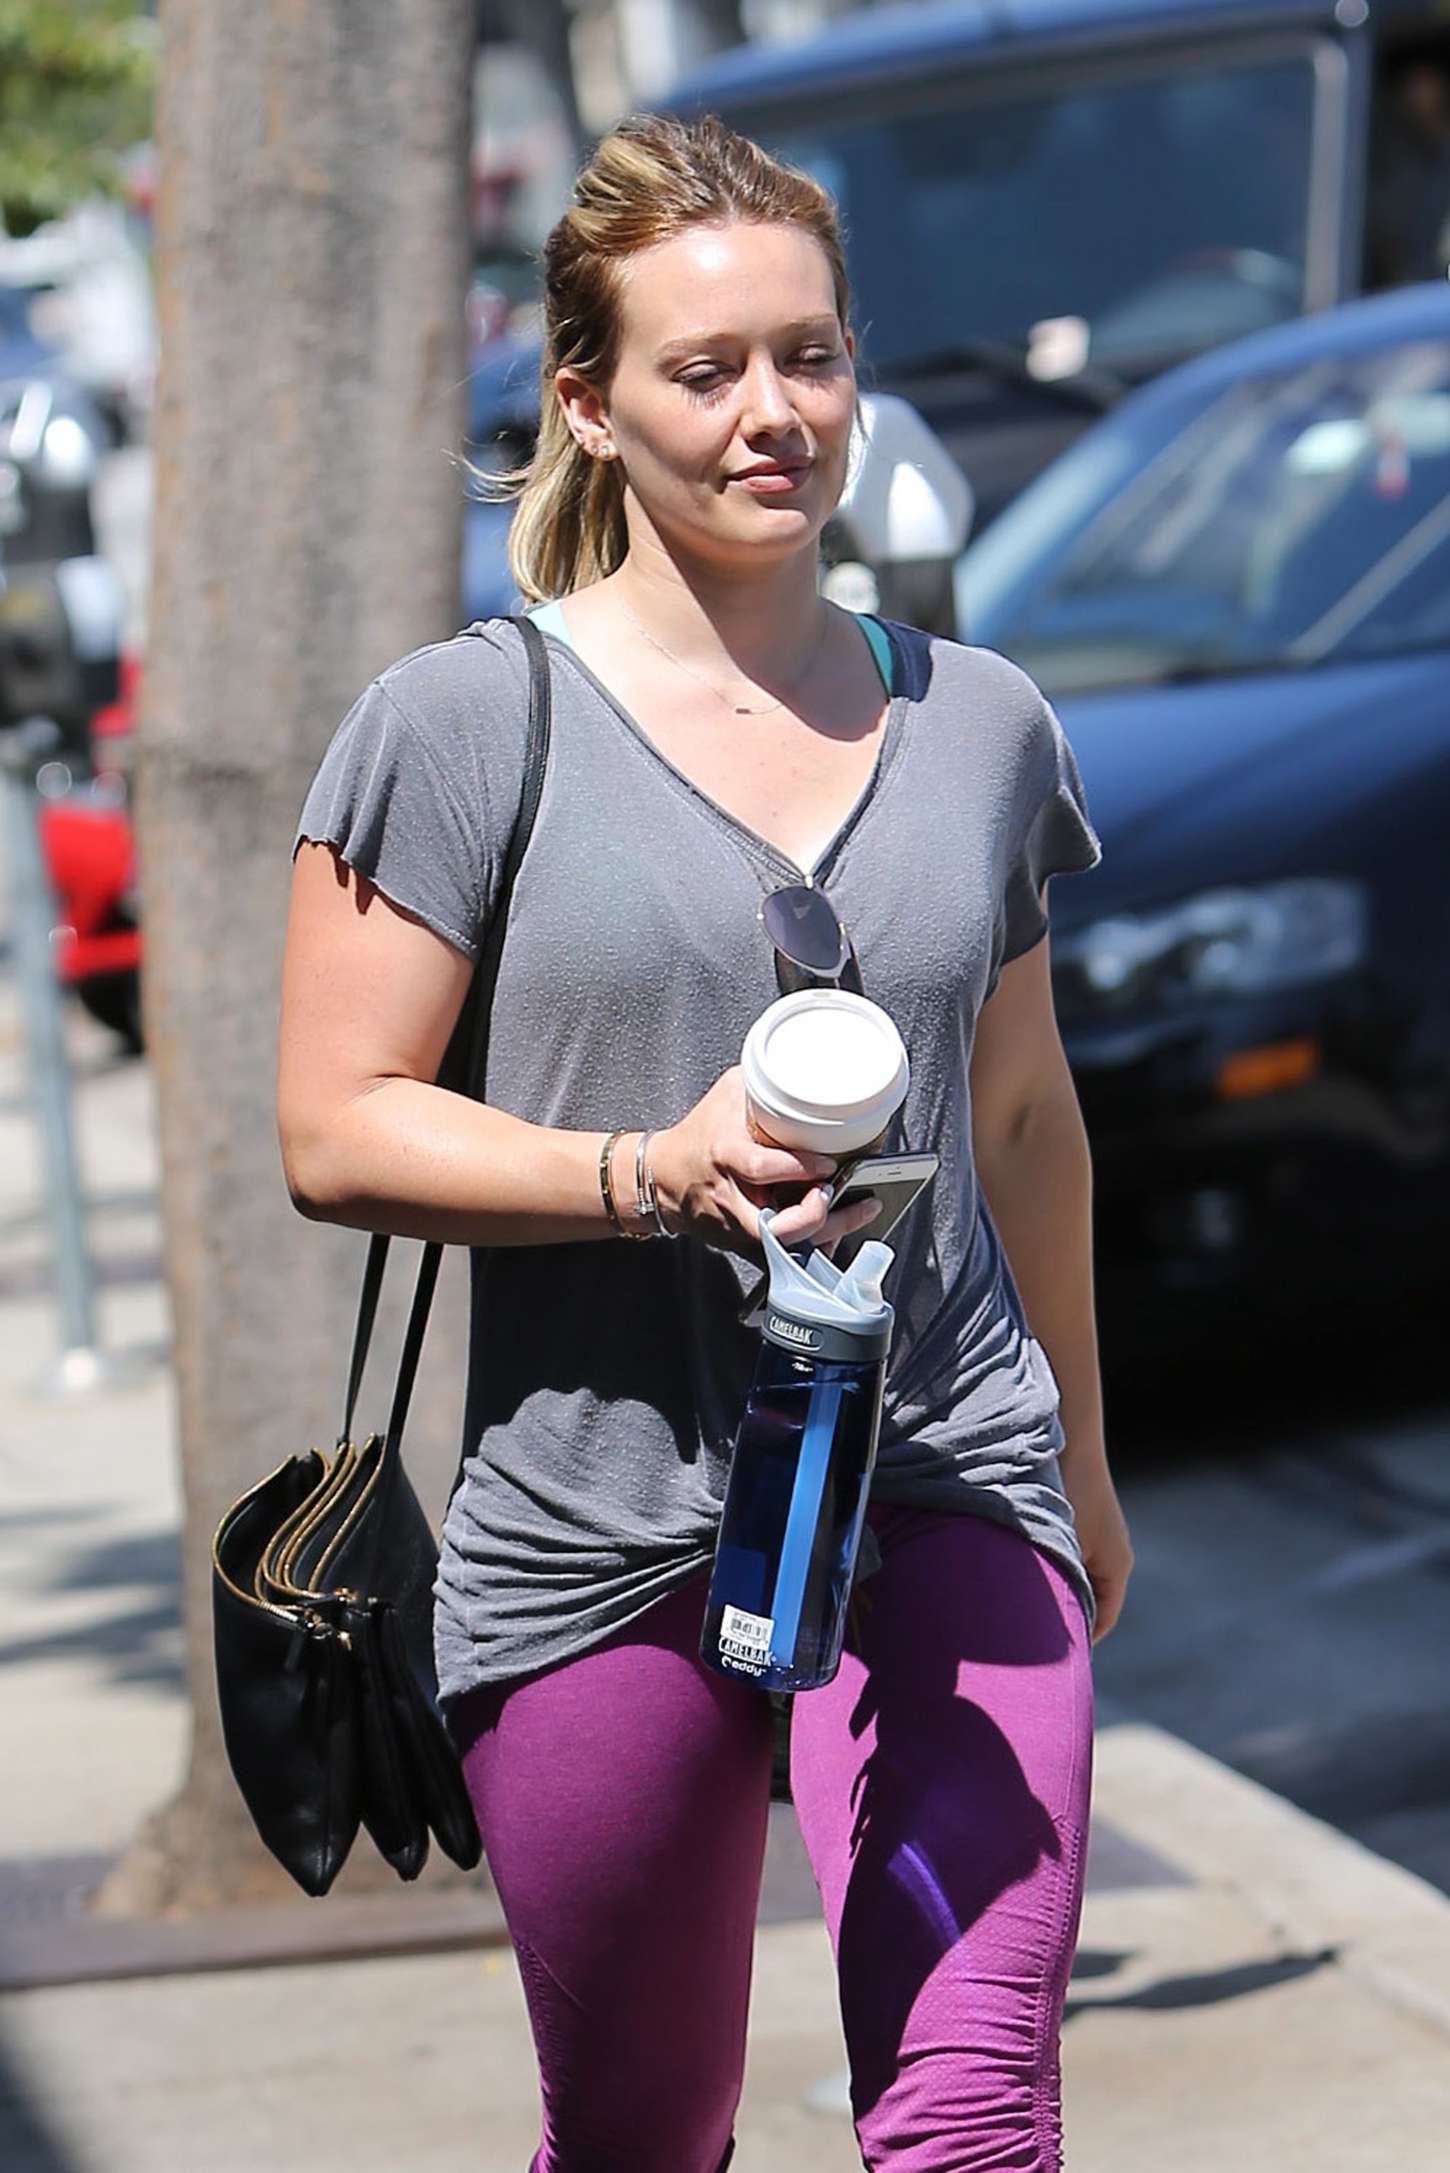 Hilary Duff in Spandex Leaving the Gym in West Hollywood